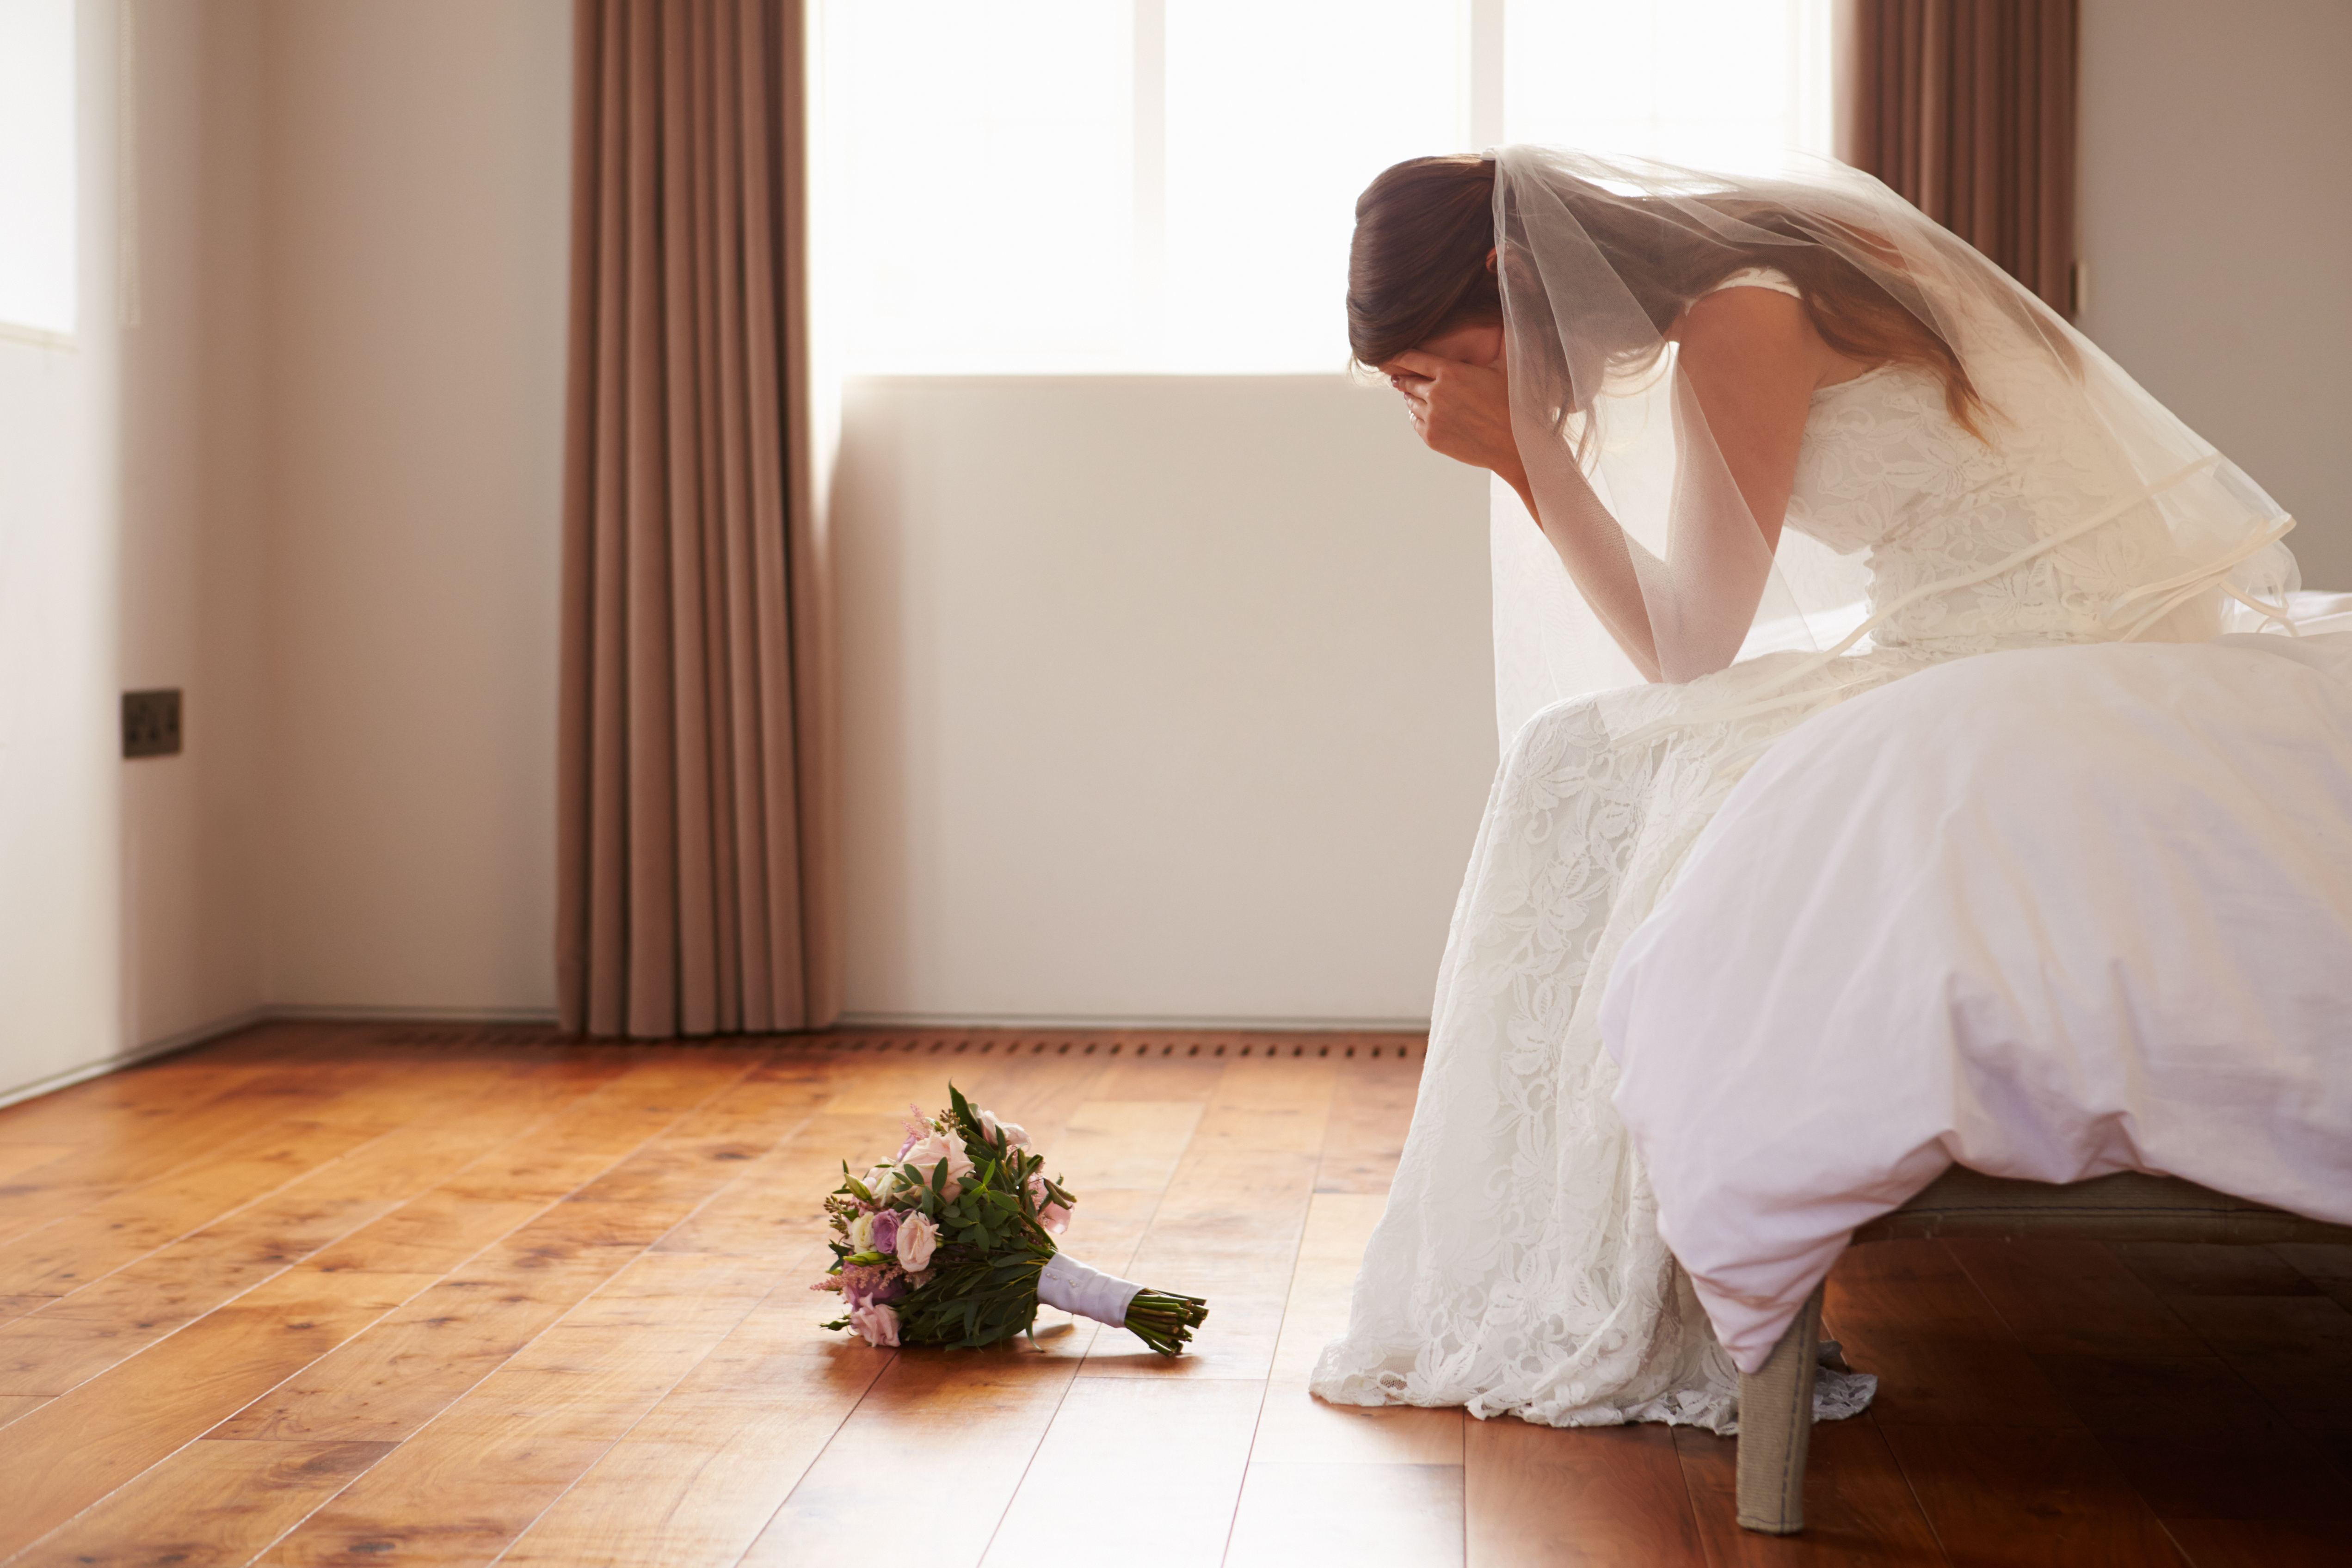 A sad bride sitting in a room | Source: Shutterstock